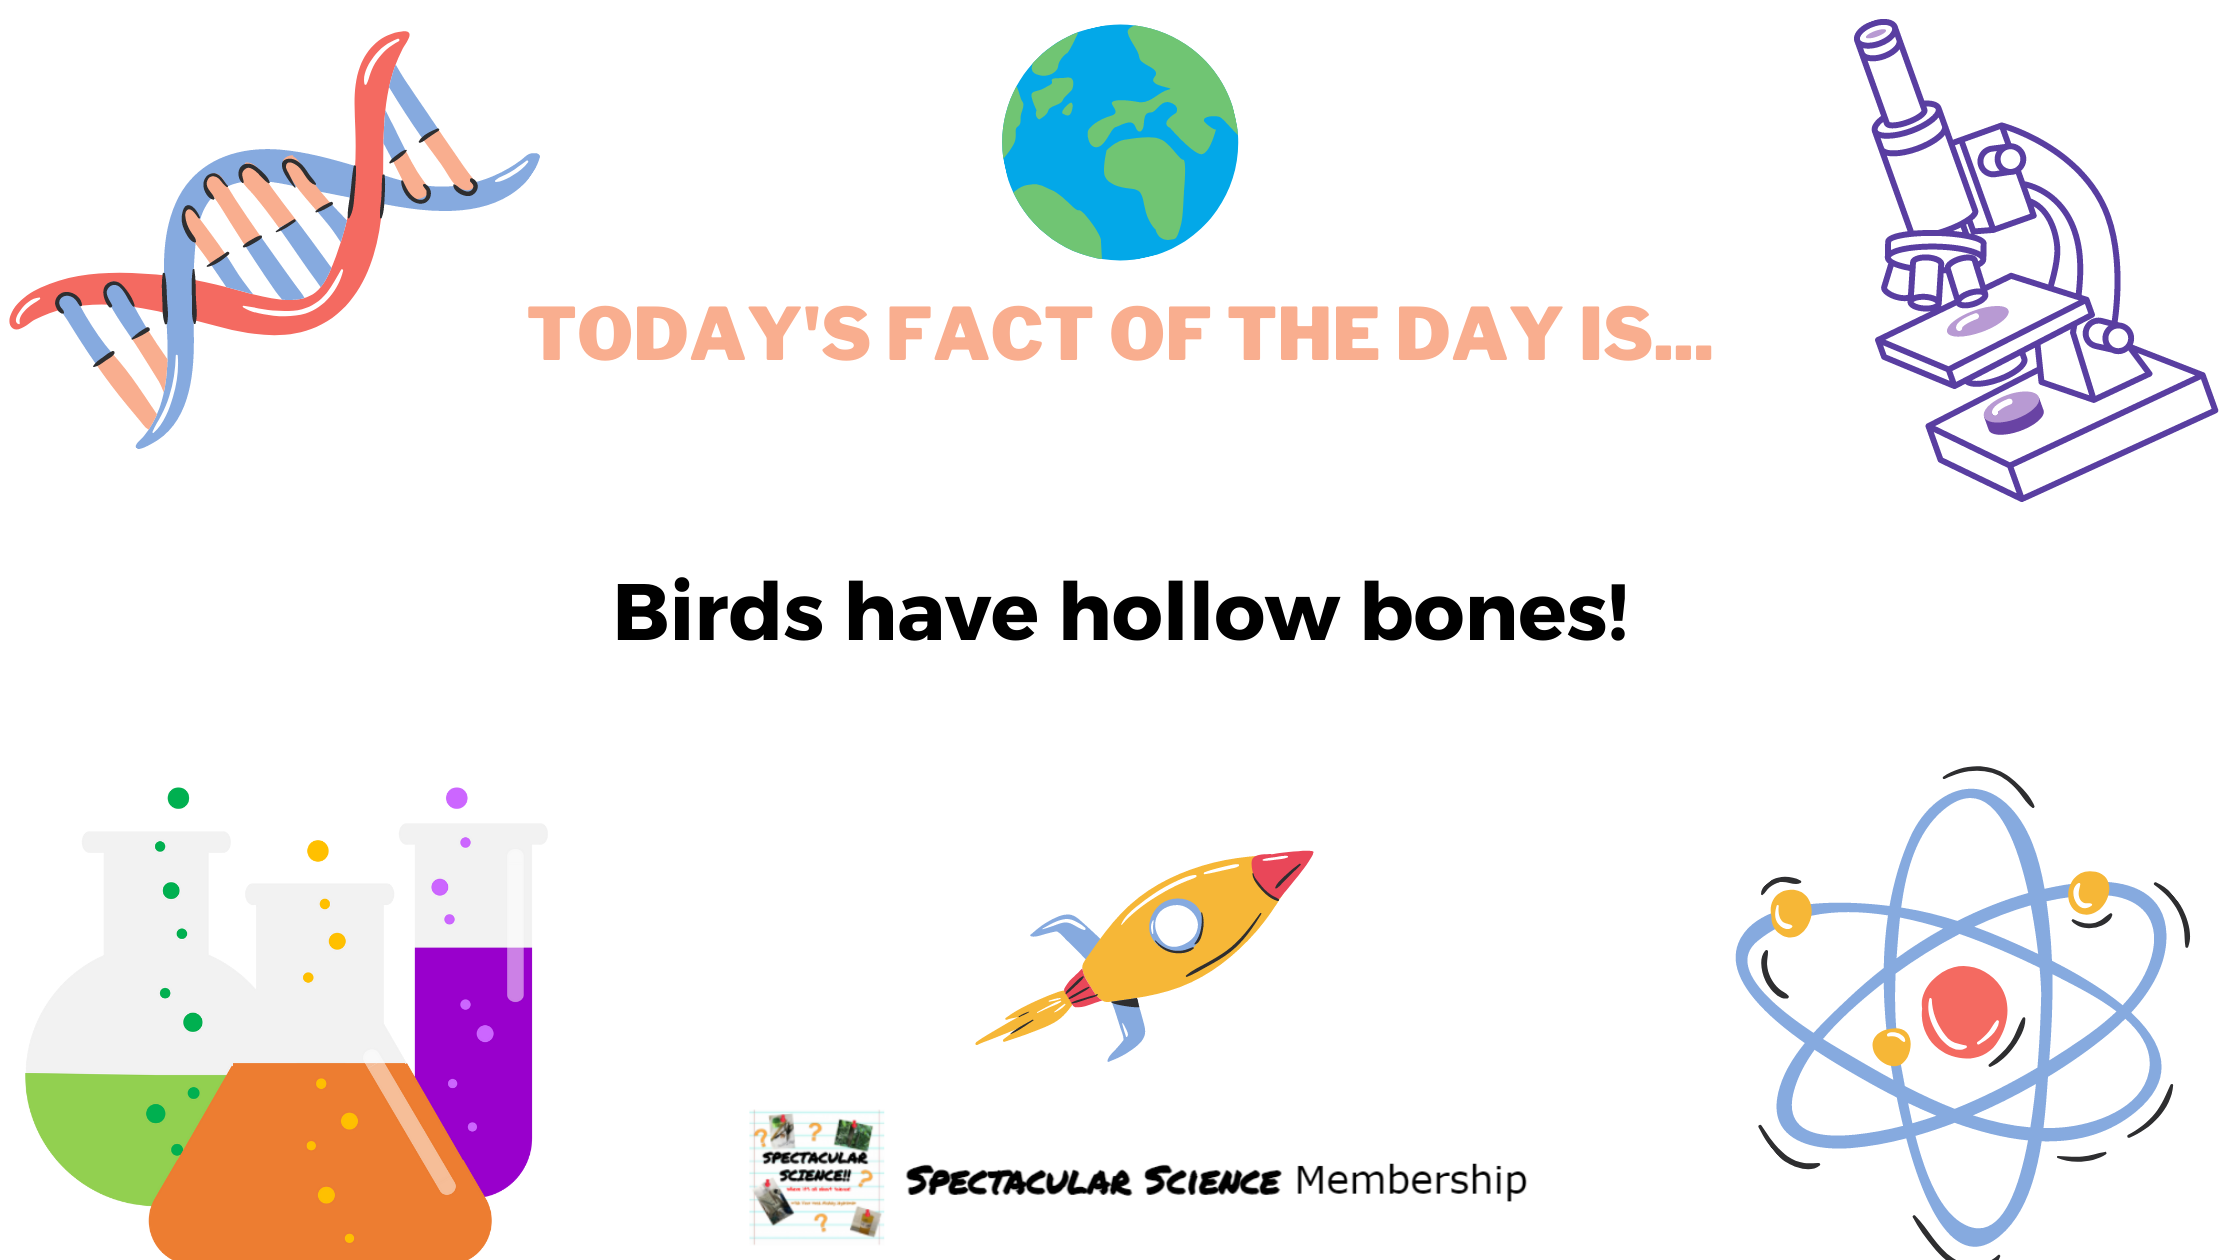 Fact of the Day Image Feb. 9th